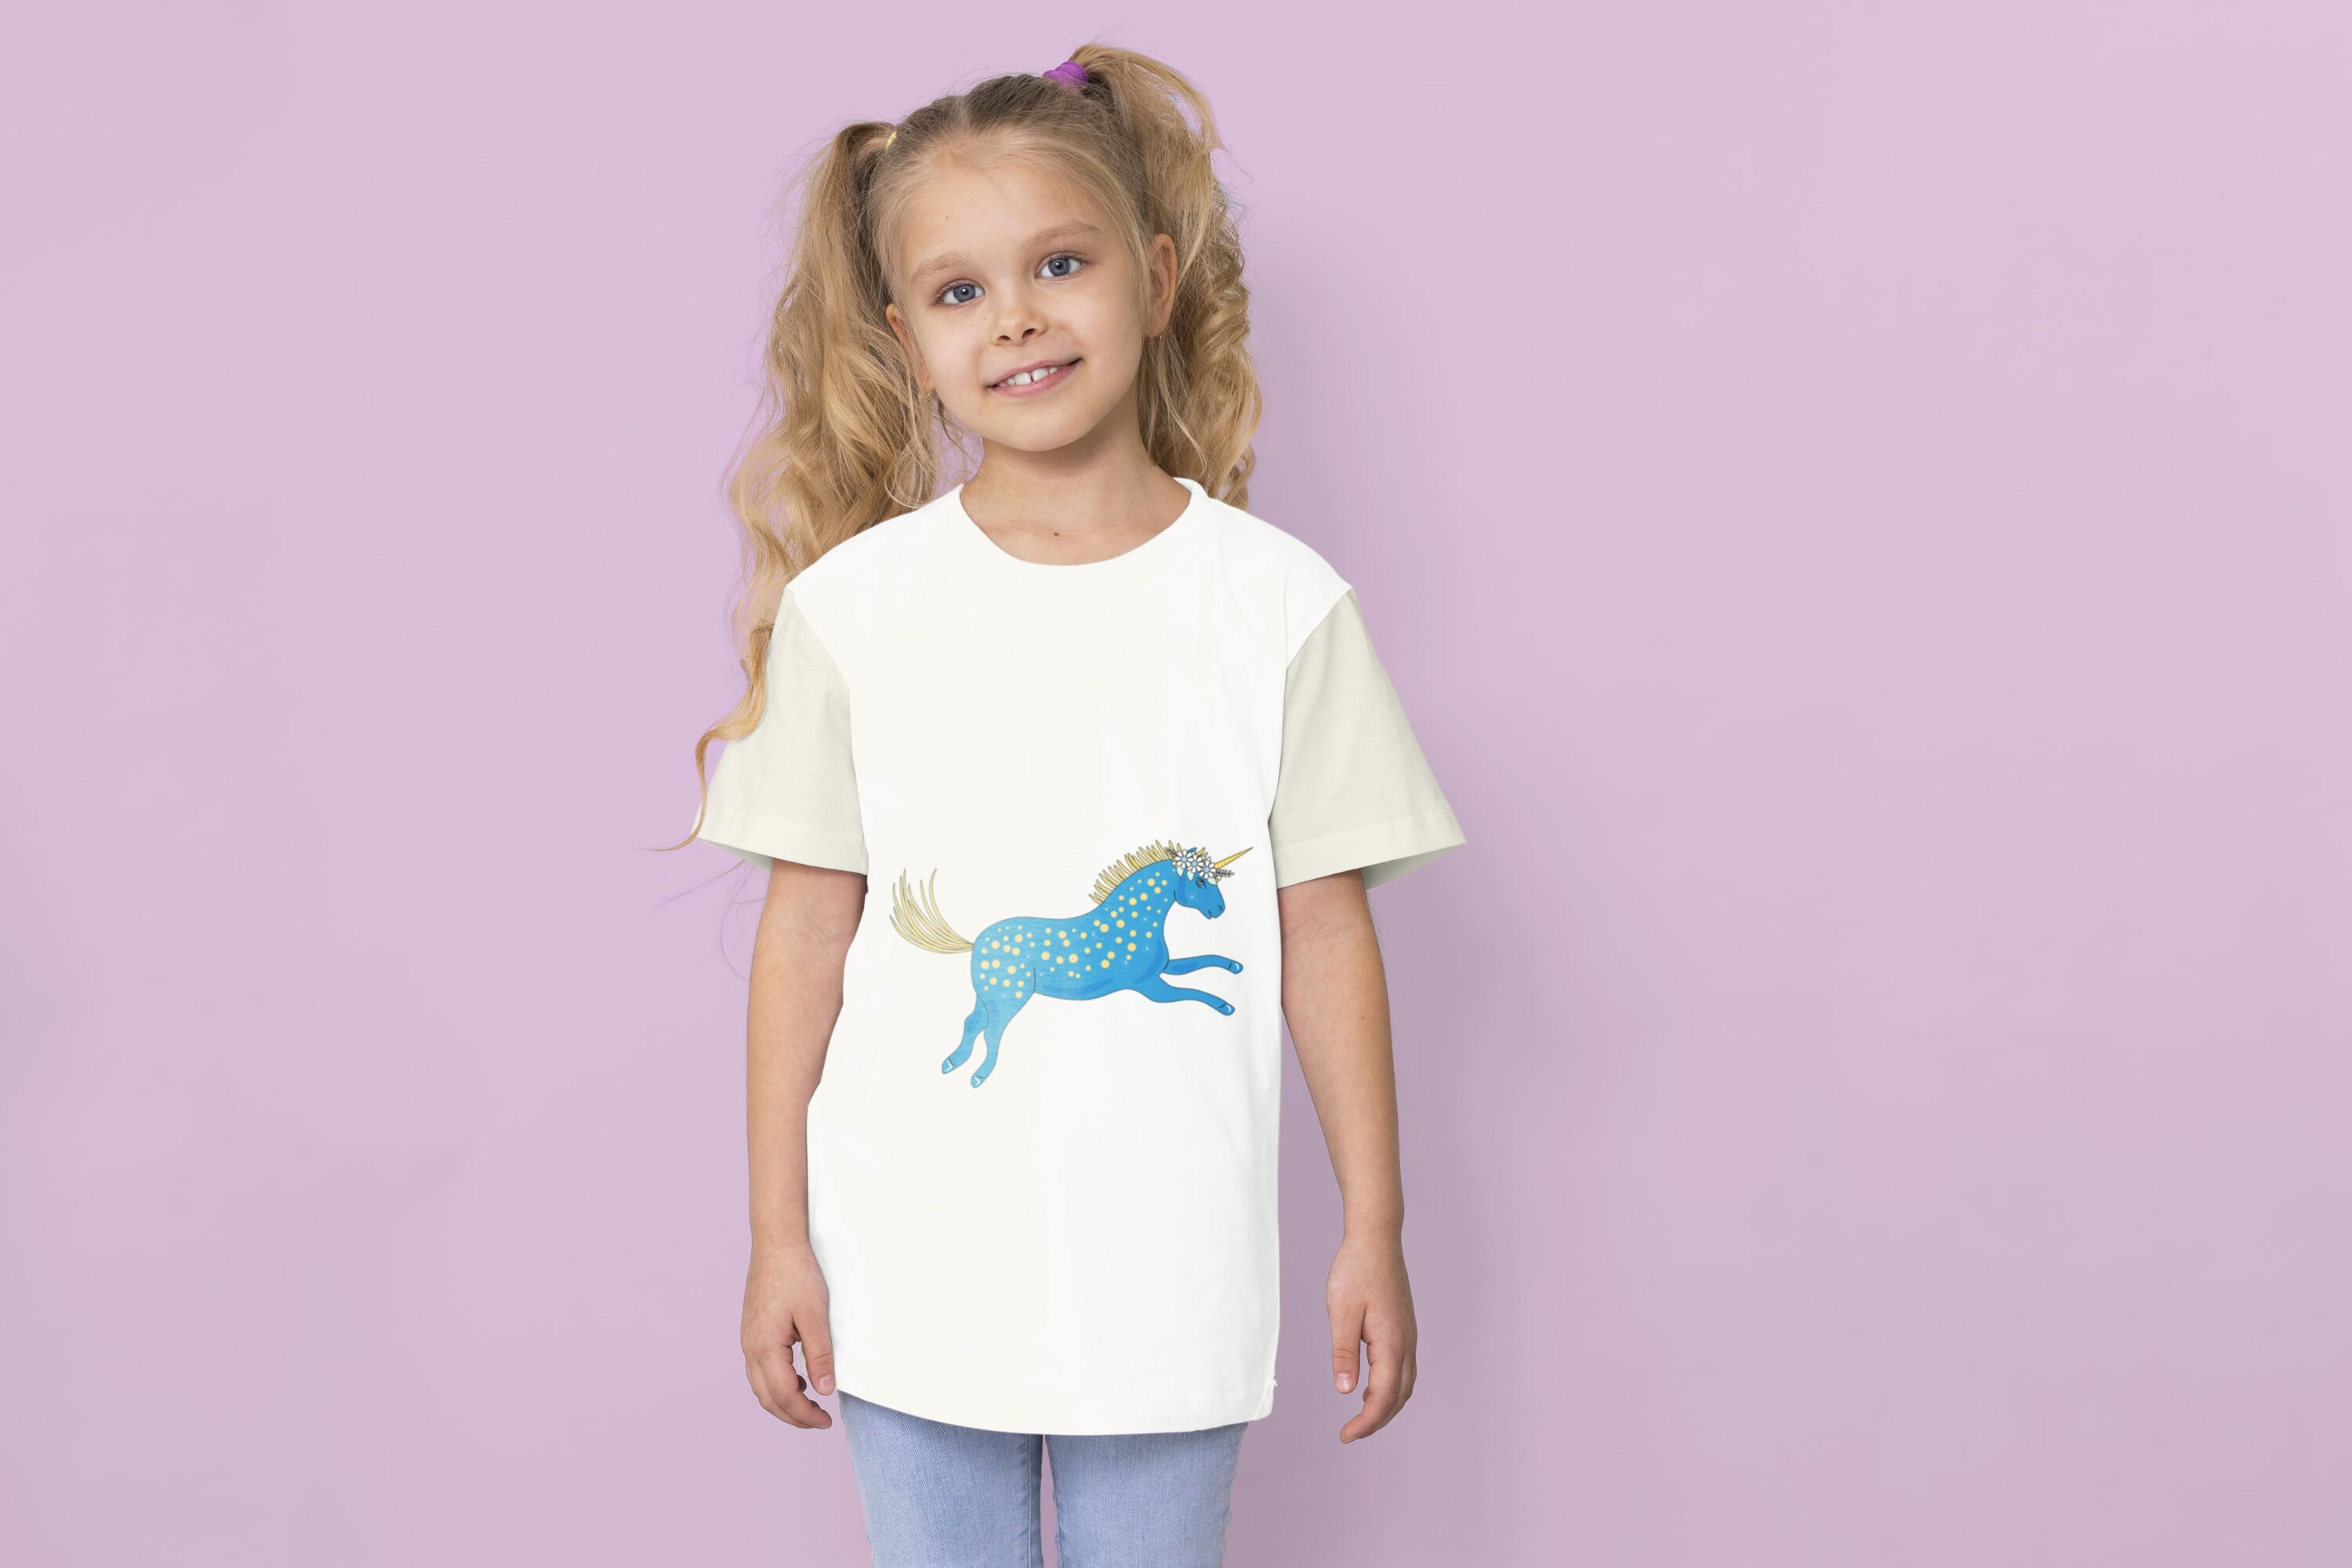 A white t-shirt with a blue unicorn on a girl on a lavender background.